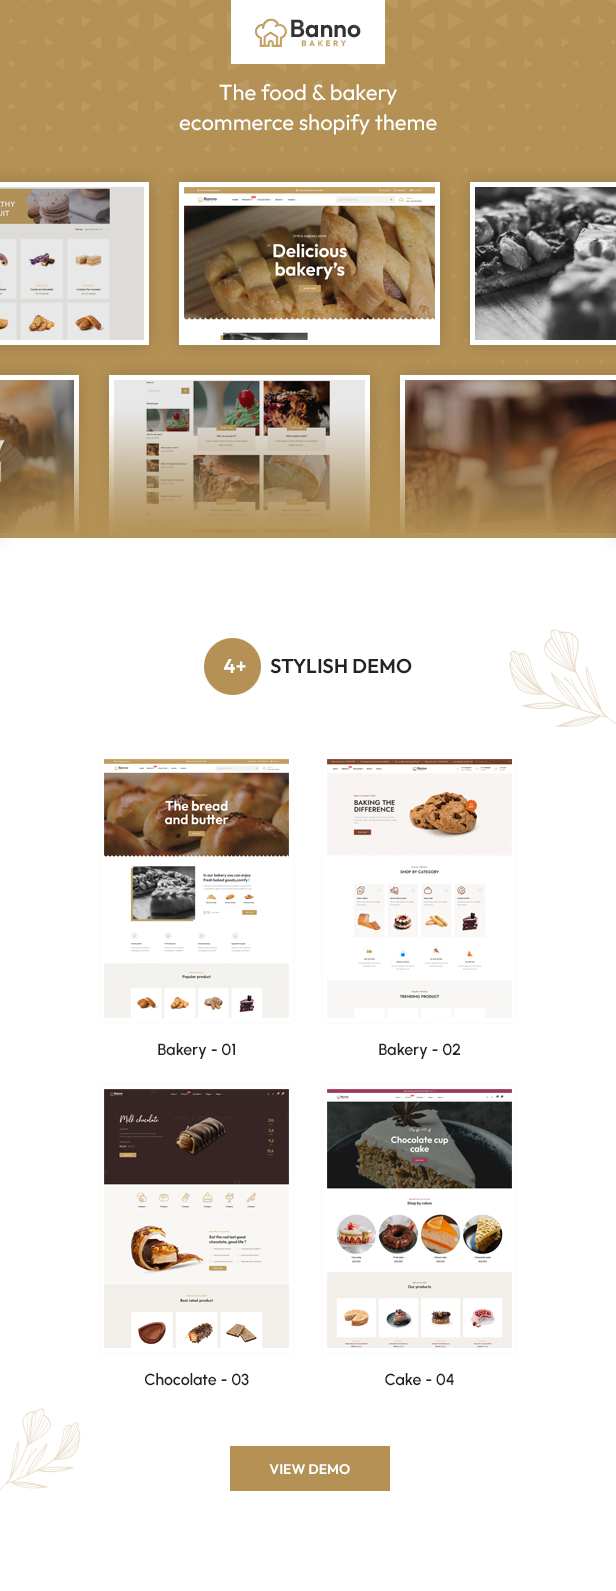 Banno - The Food & Bakery eCommerce Shopify Theme - 1